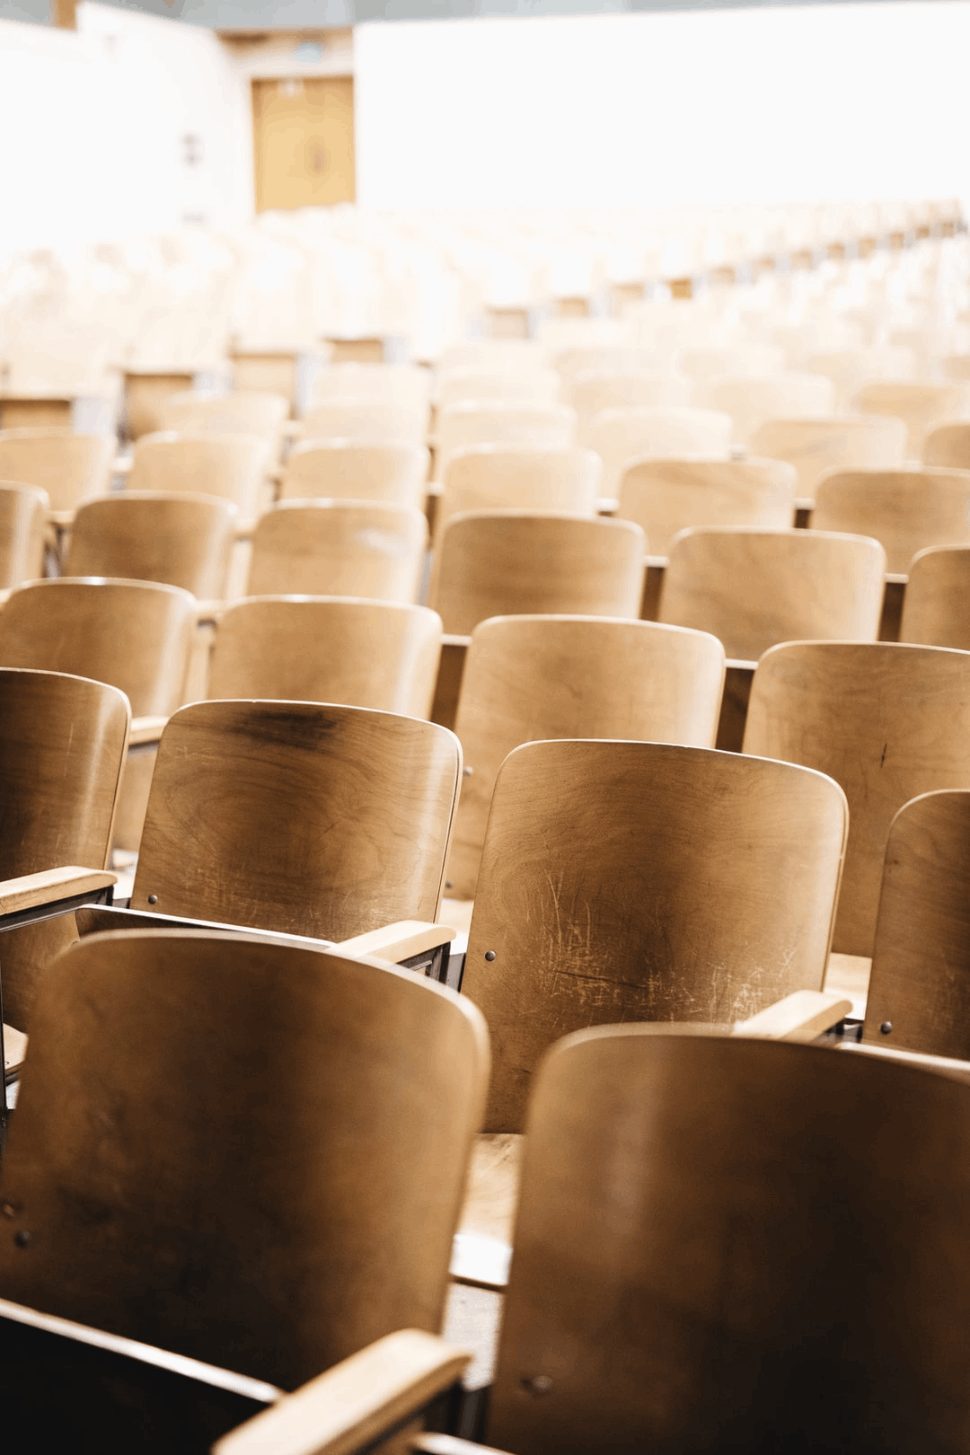 vacant brown wooden chairs at a lecture hall of an university